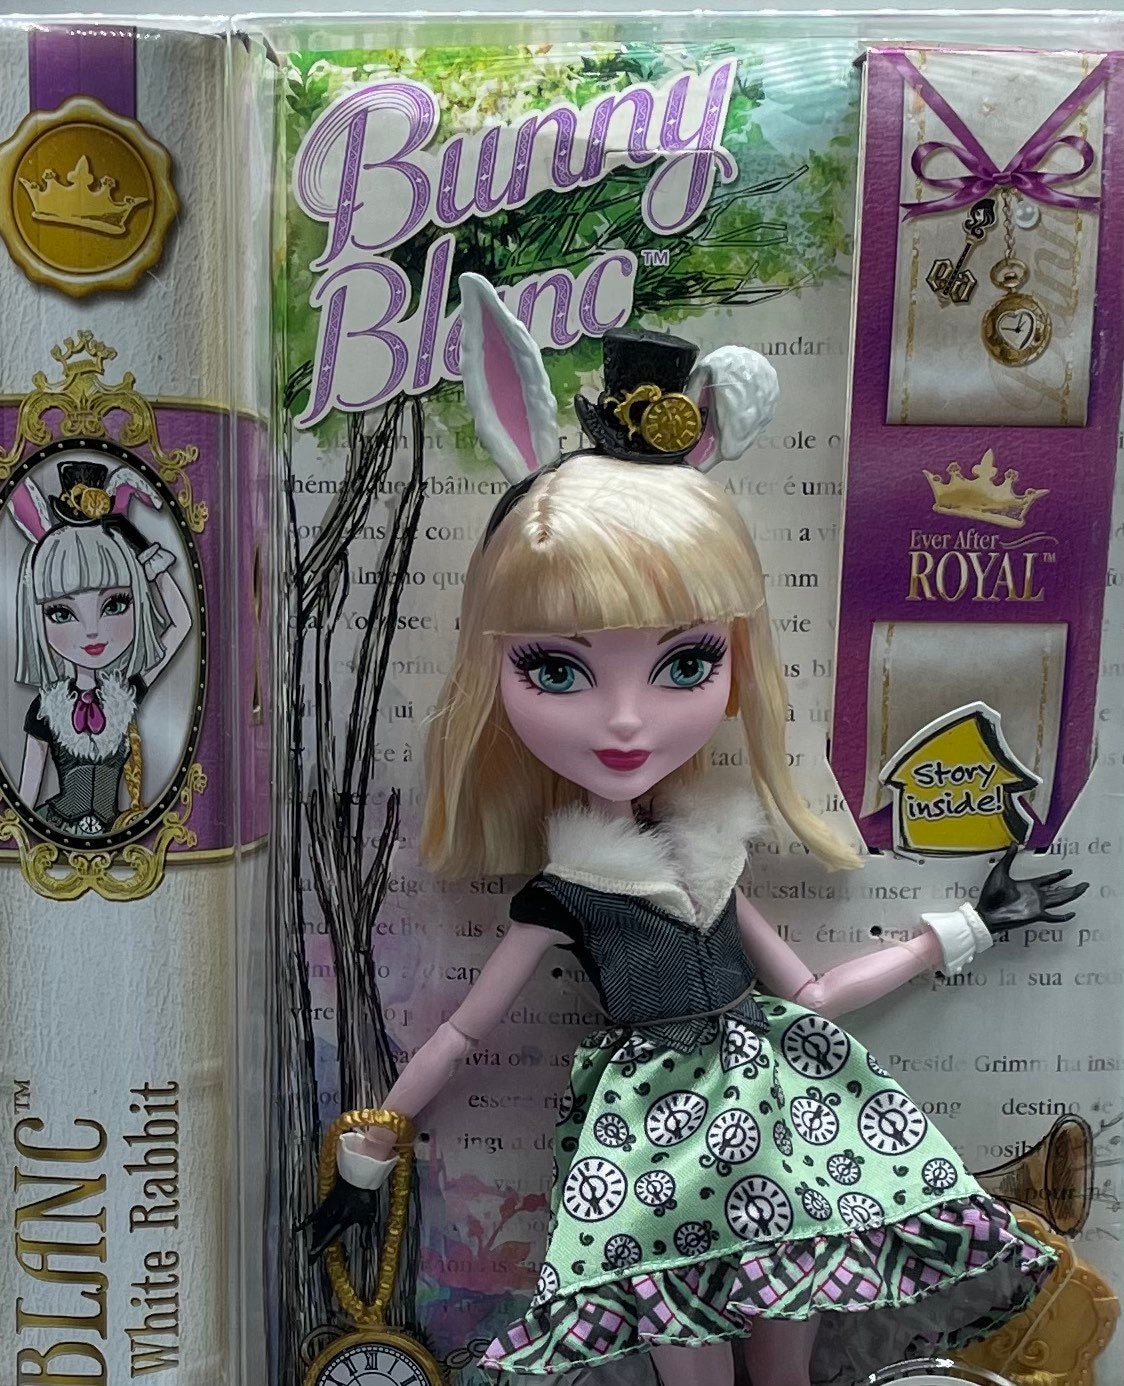 My toys,loves and fashions: Ever After High - Pés das bonecas!!!